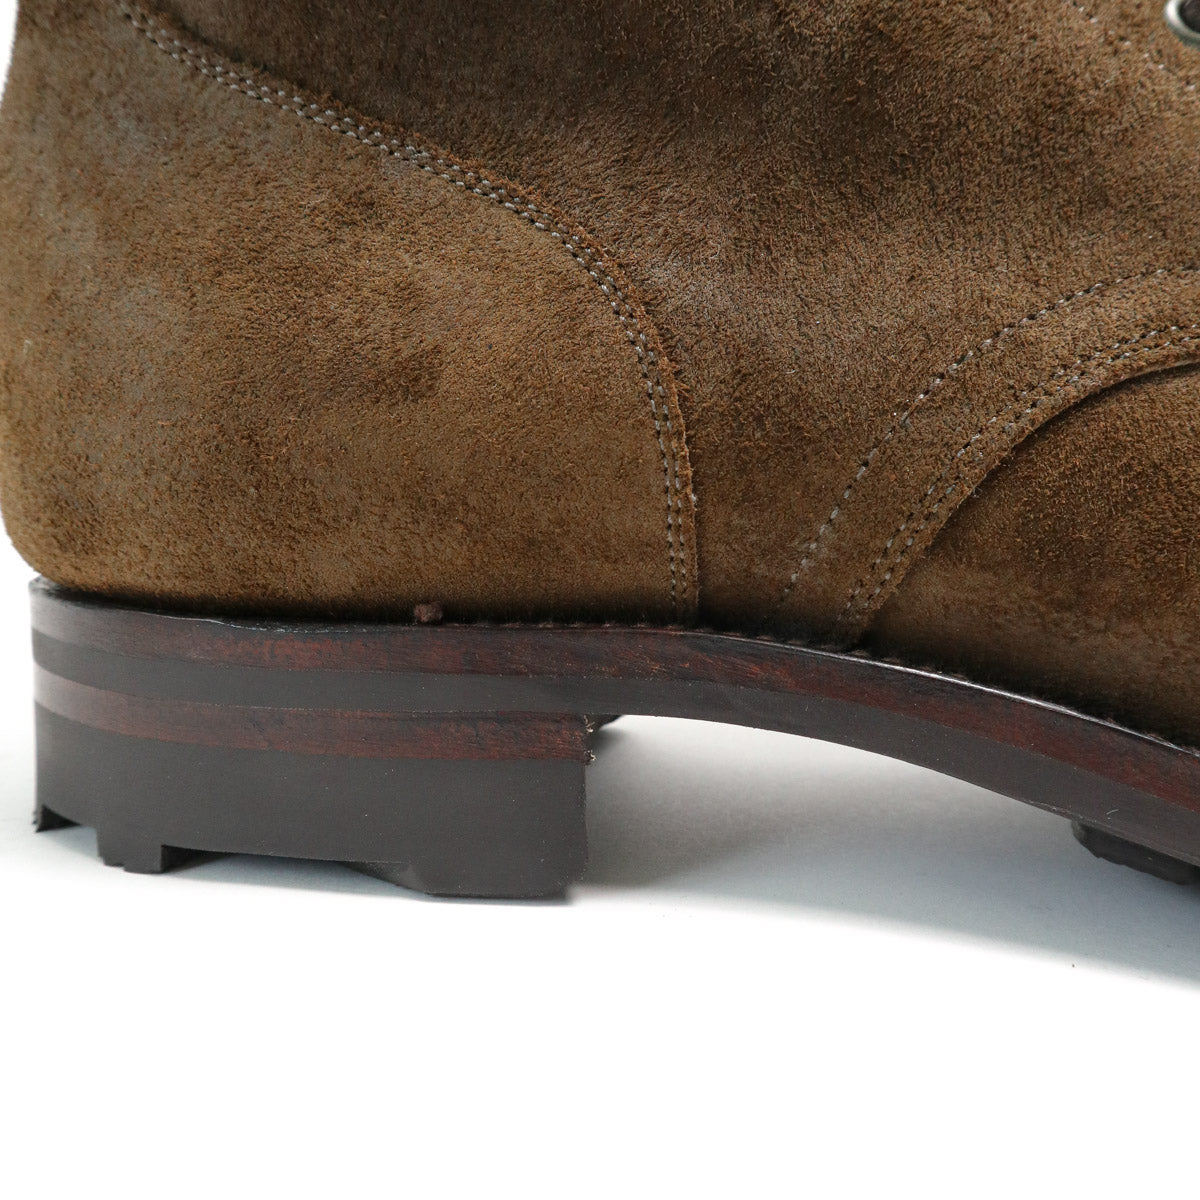 Service Boot 2040 Horween Mushroom Chamois Roughout